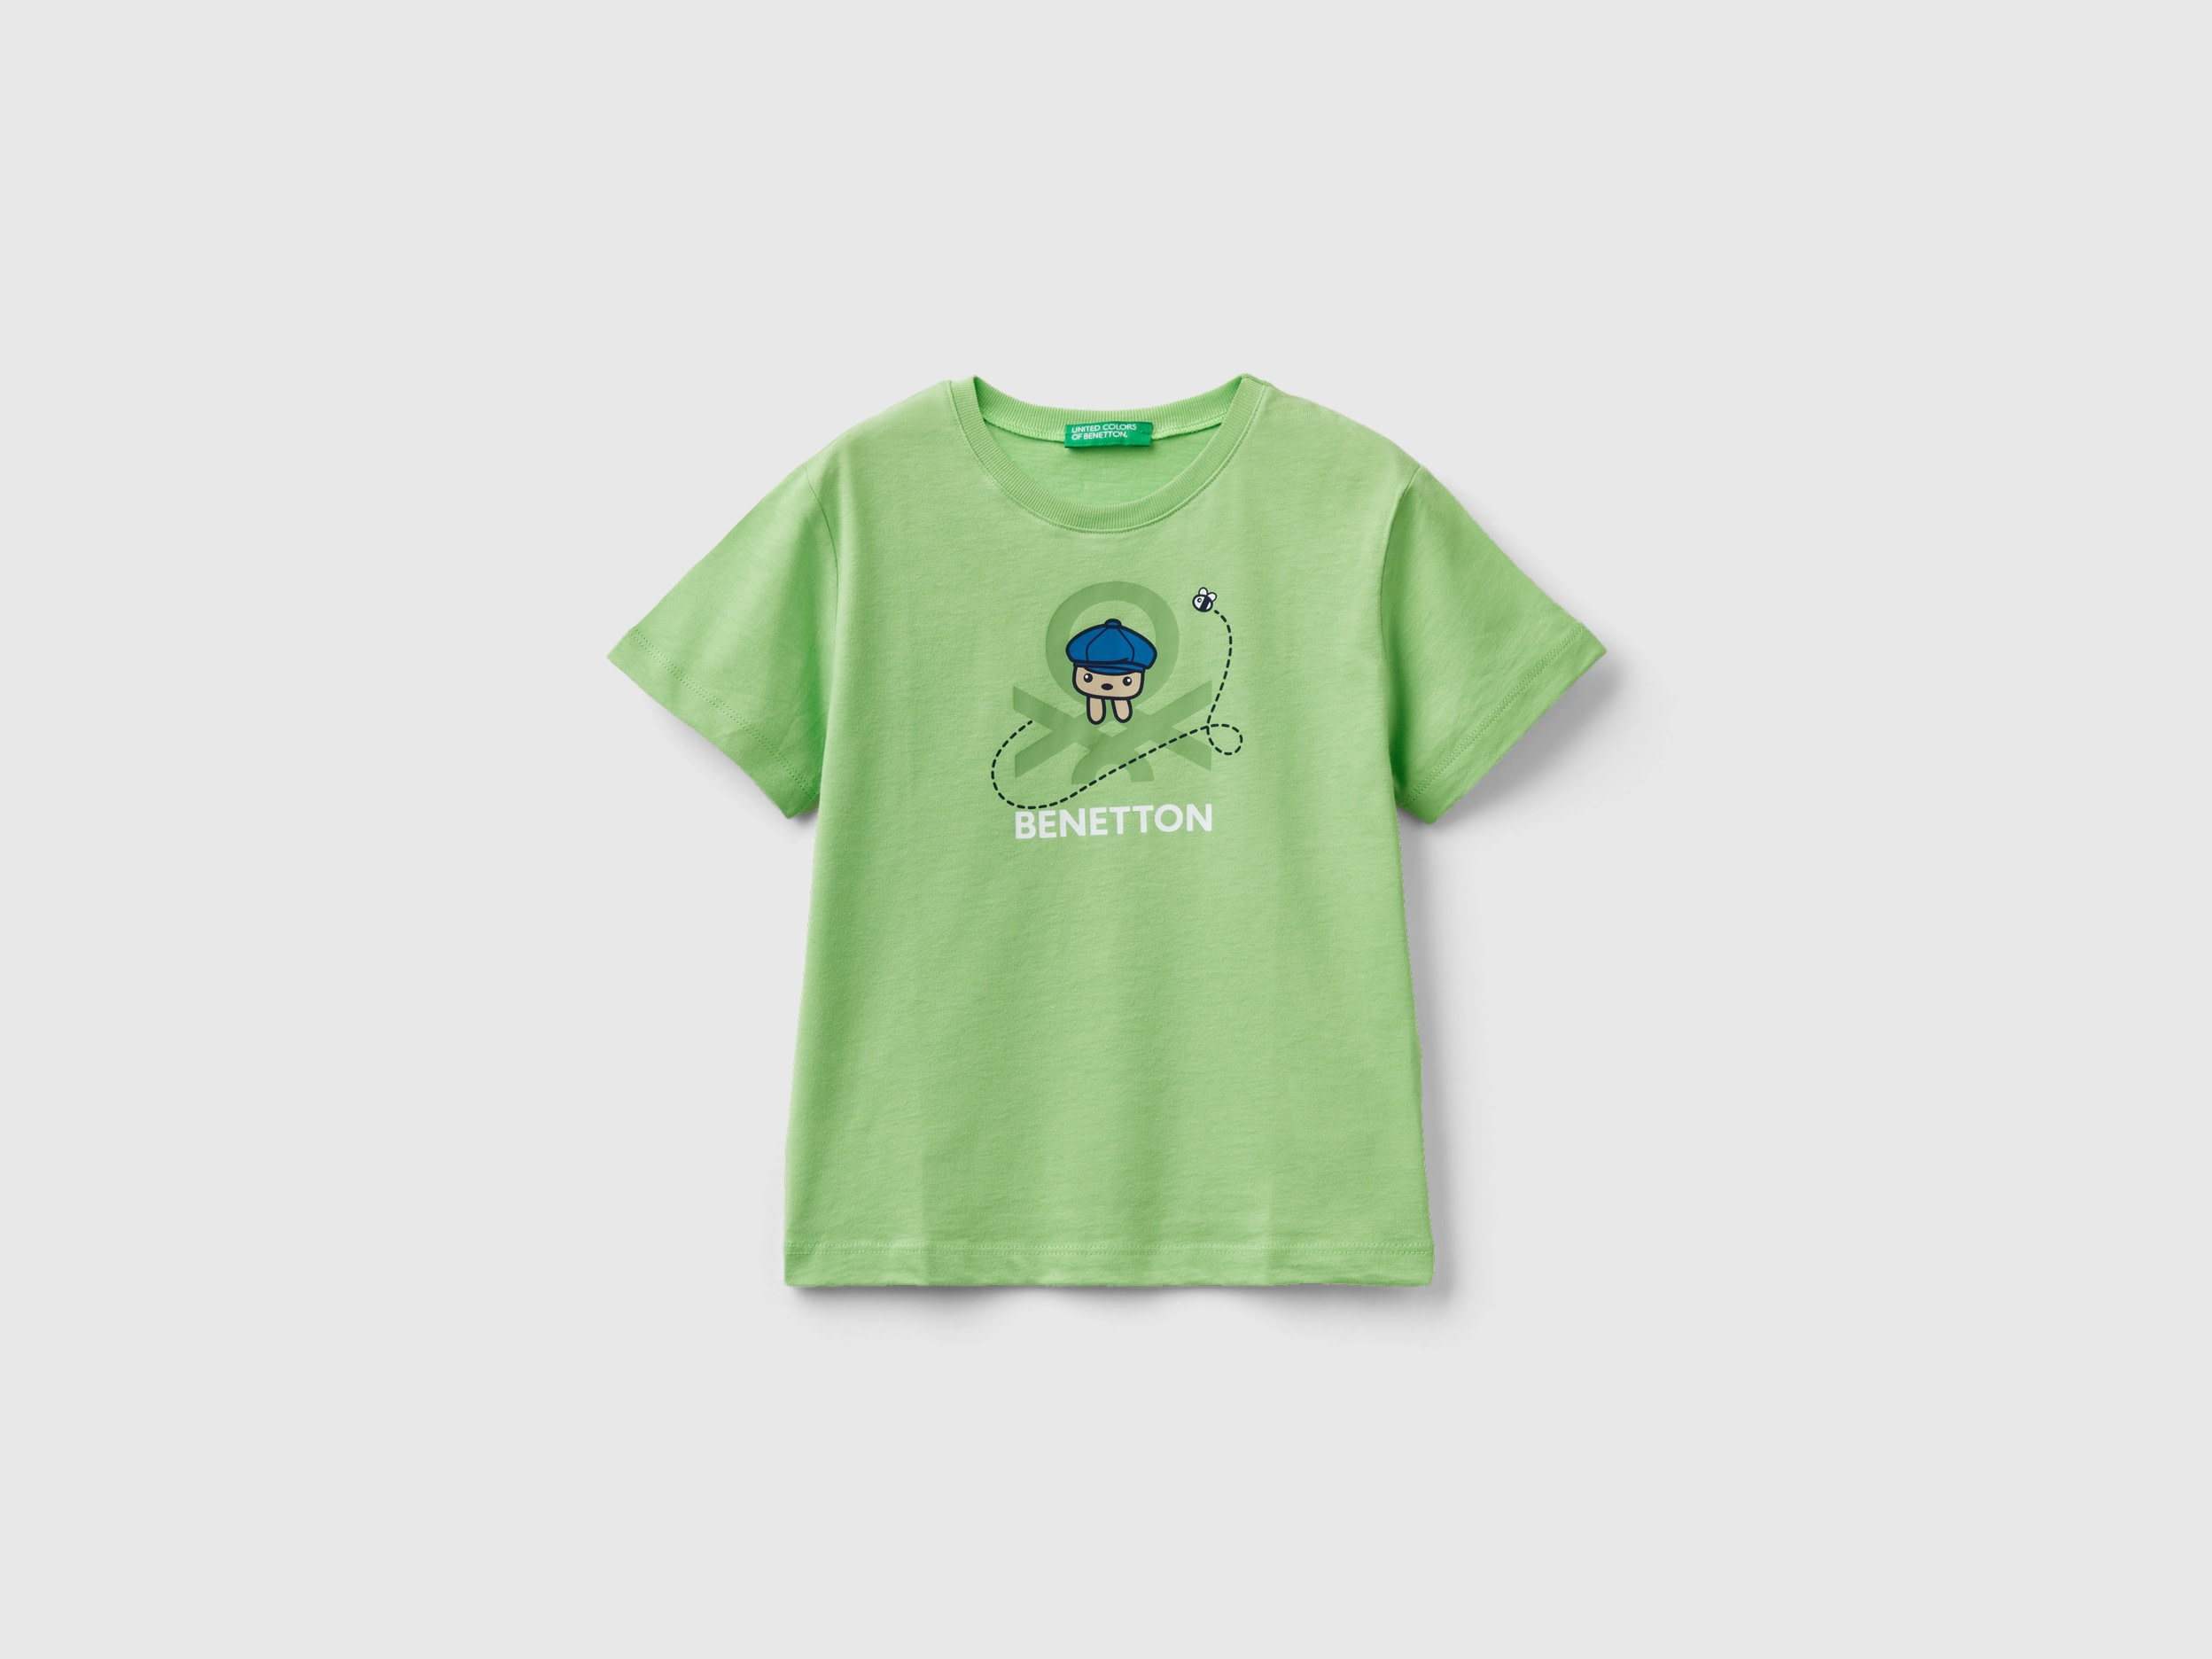 Benetton, T-shirt With Print In 100% Organic Cotton, size 12-18, Light Green, Kids